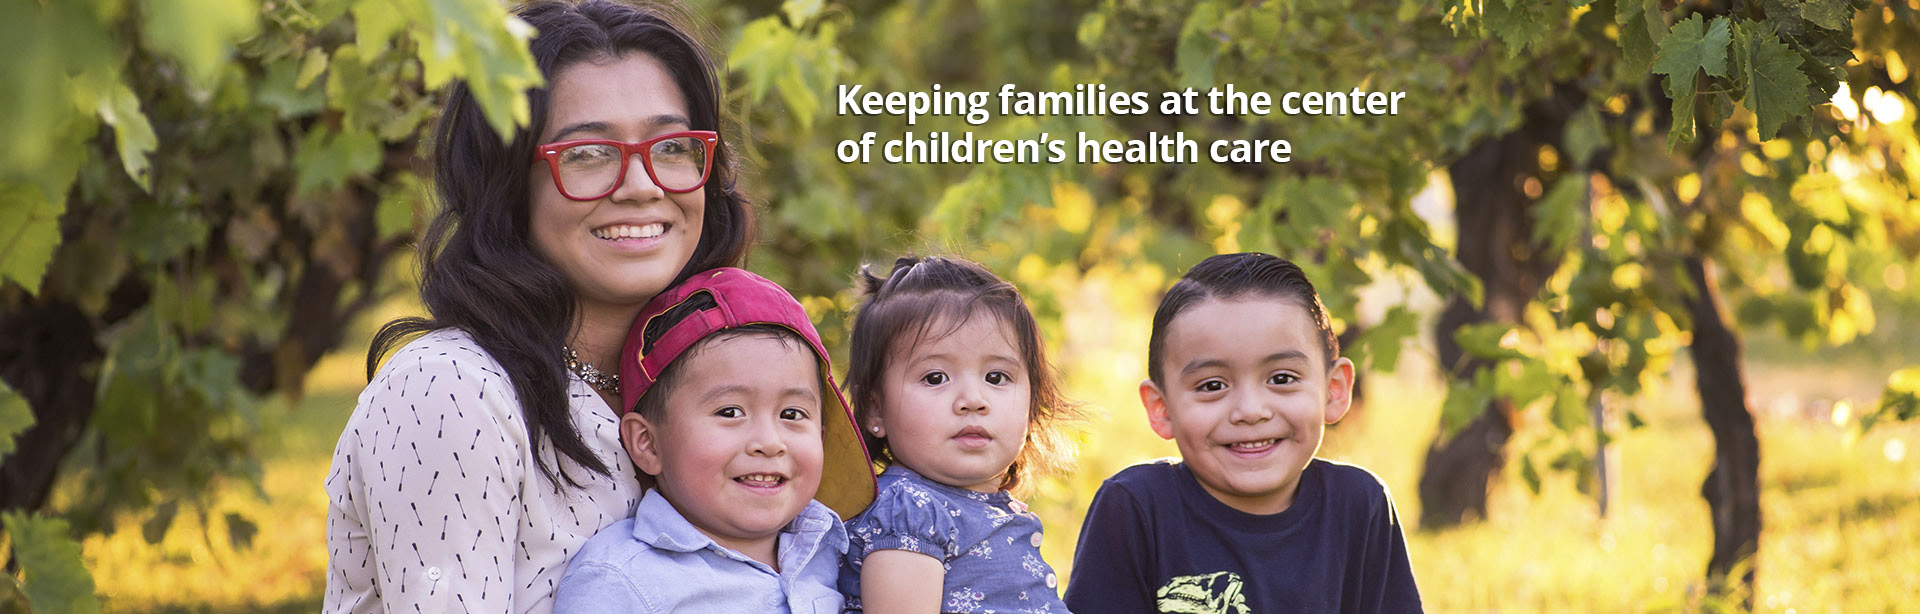 Keeping families at the center of children's health care.